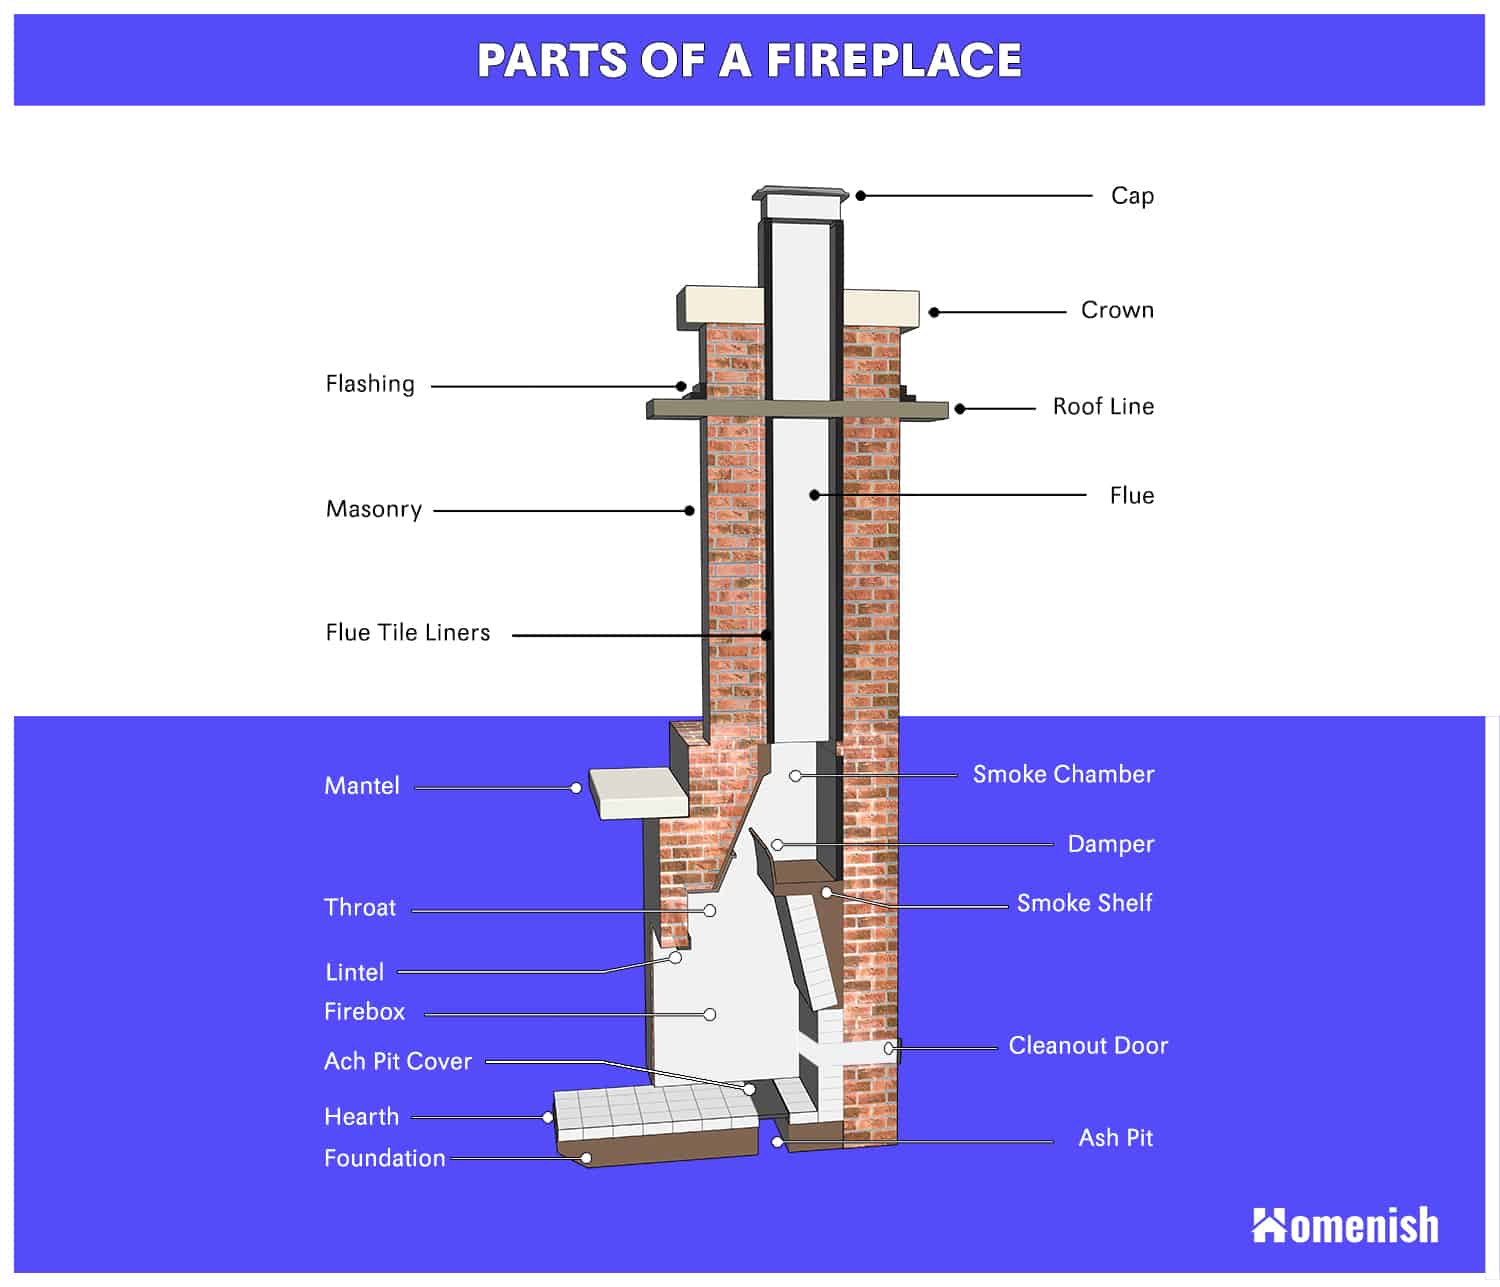 Parts Of A Fireplace Explained With, What Are Parts Of A Fireplace Called